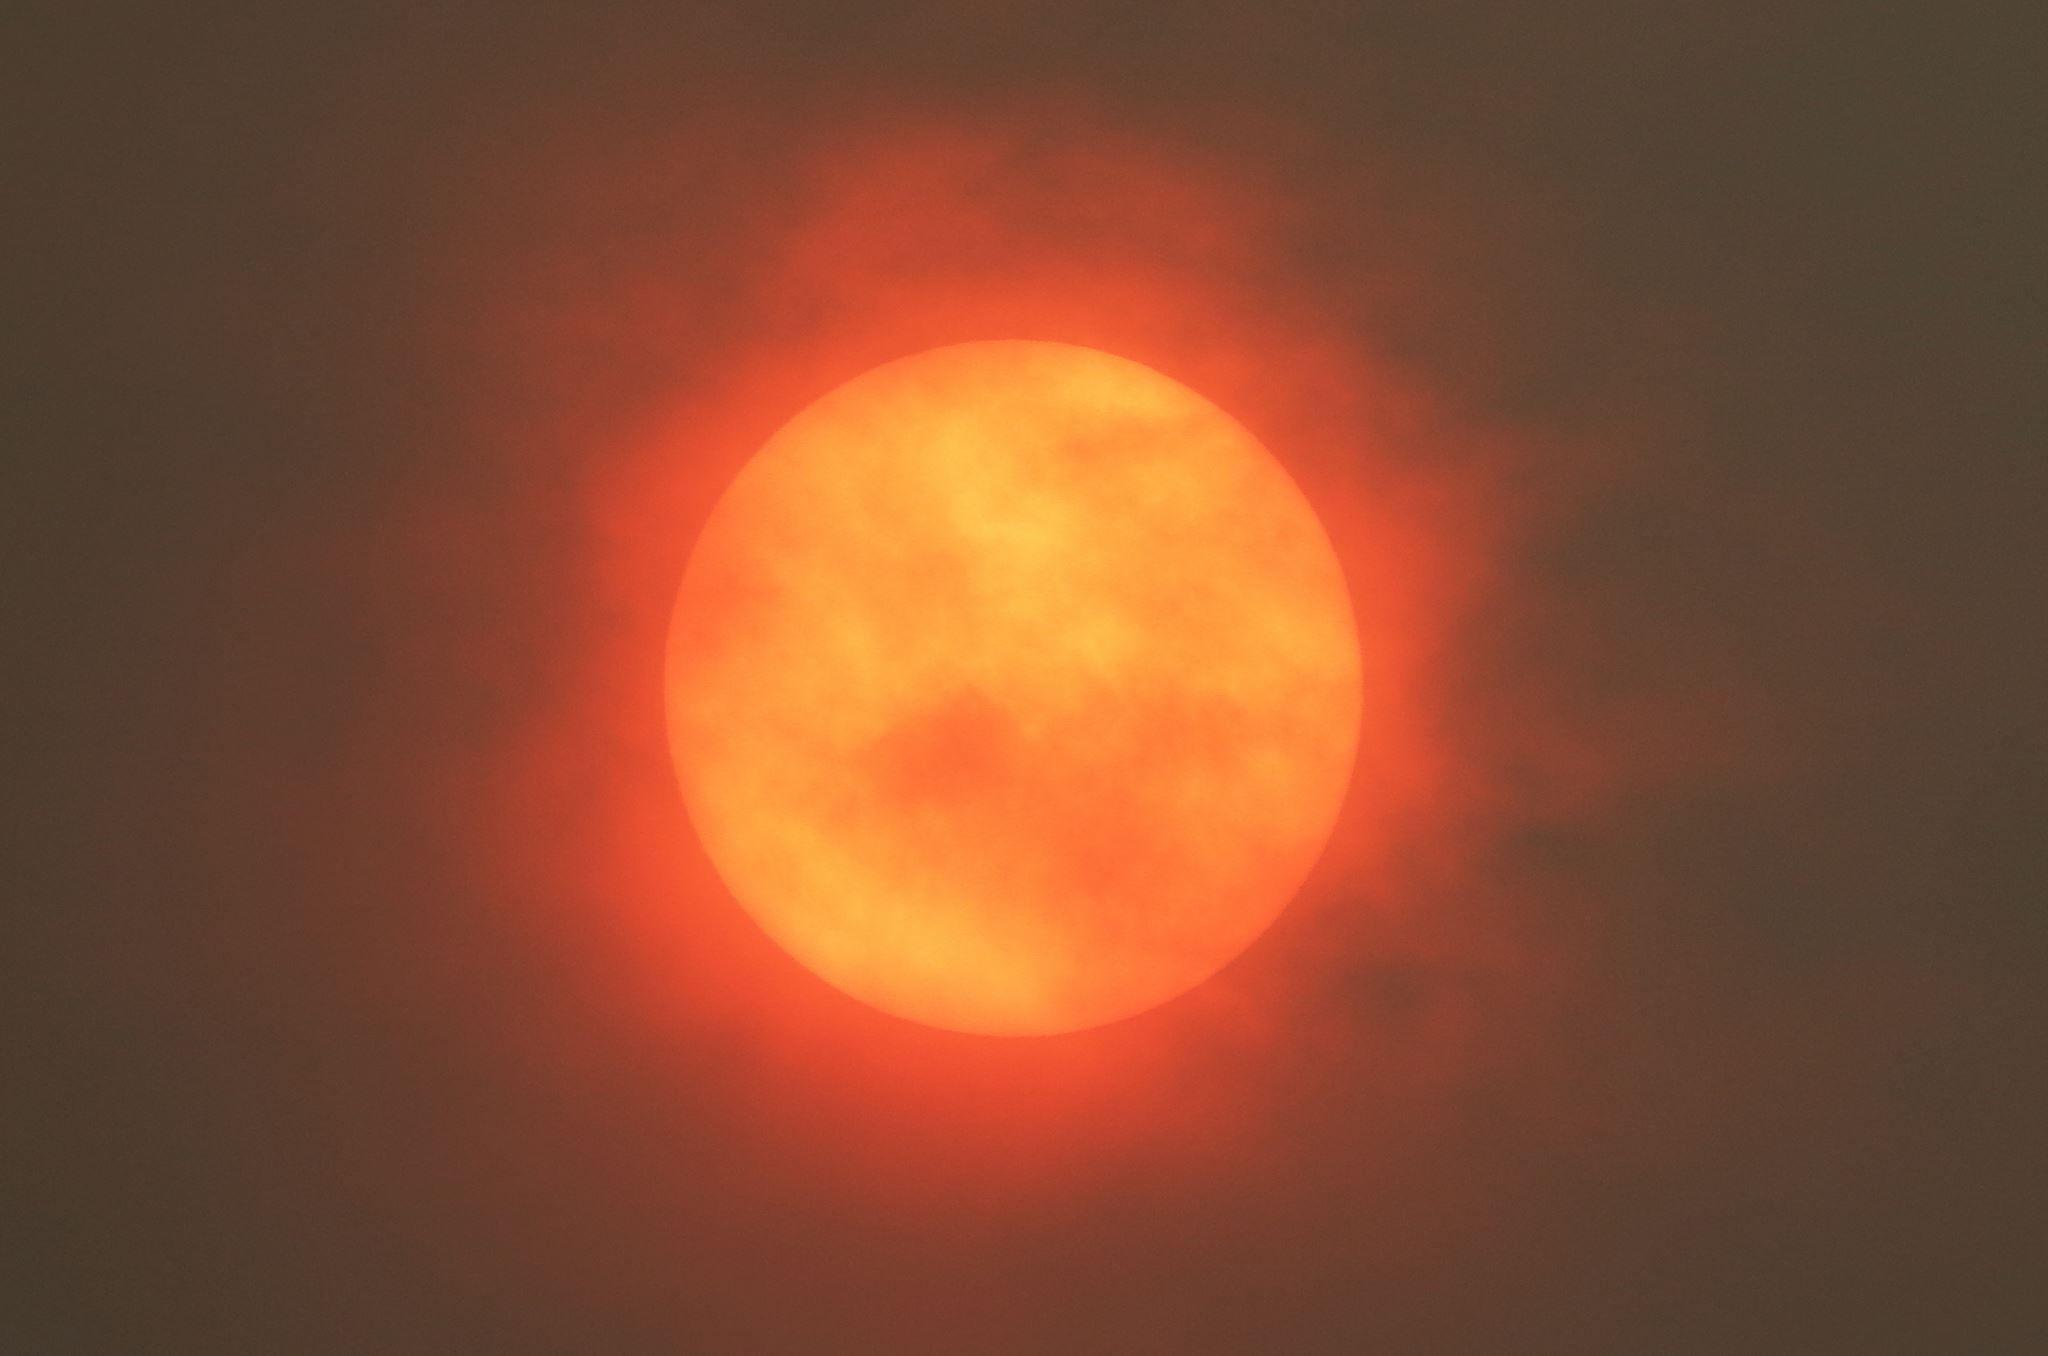 Red and Orange Sun Logo - Red sun: Your best photos of the day the sky turned orange - Amateur ...